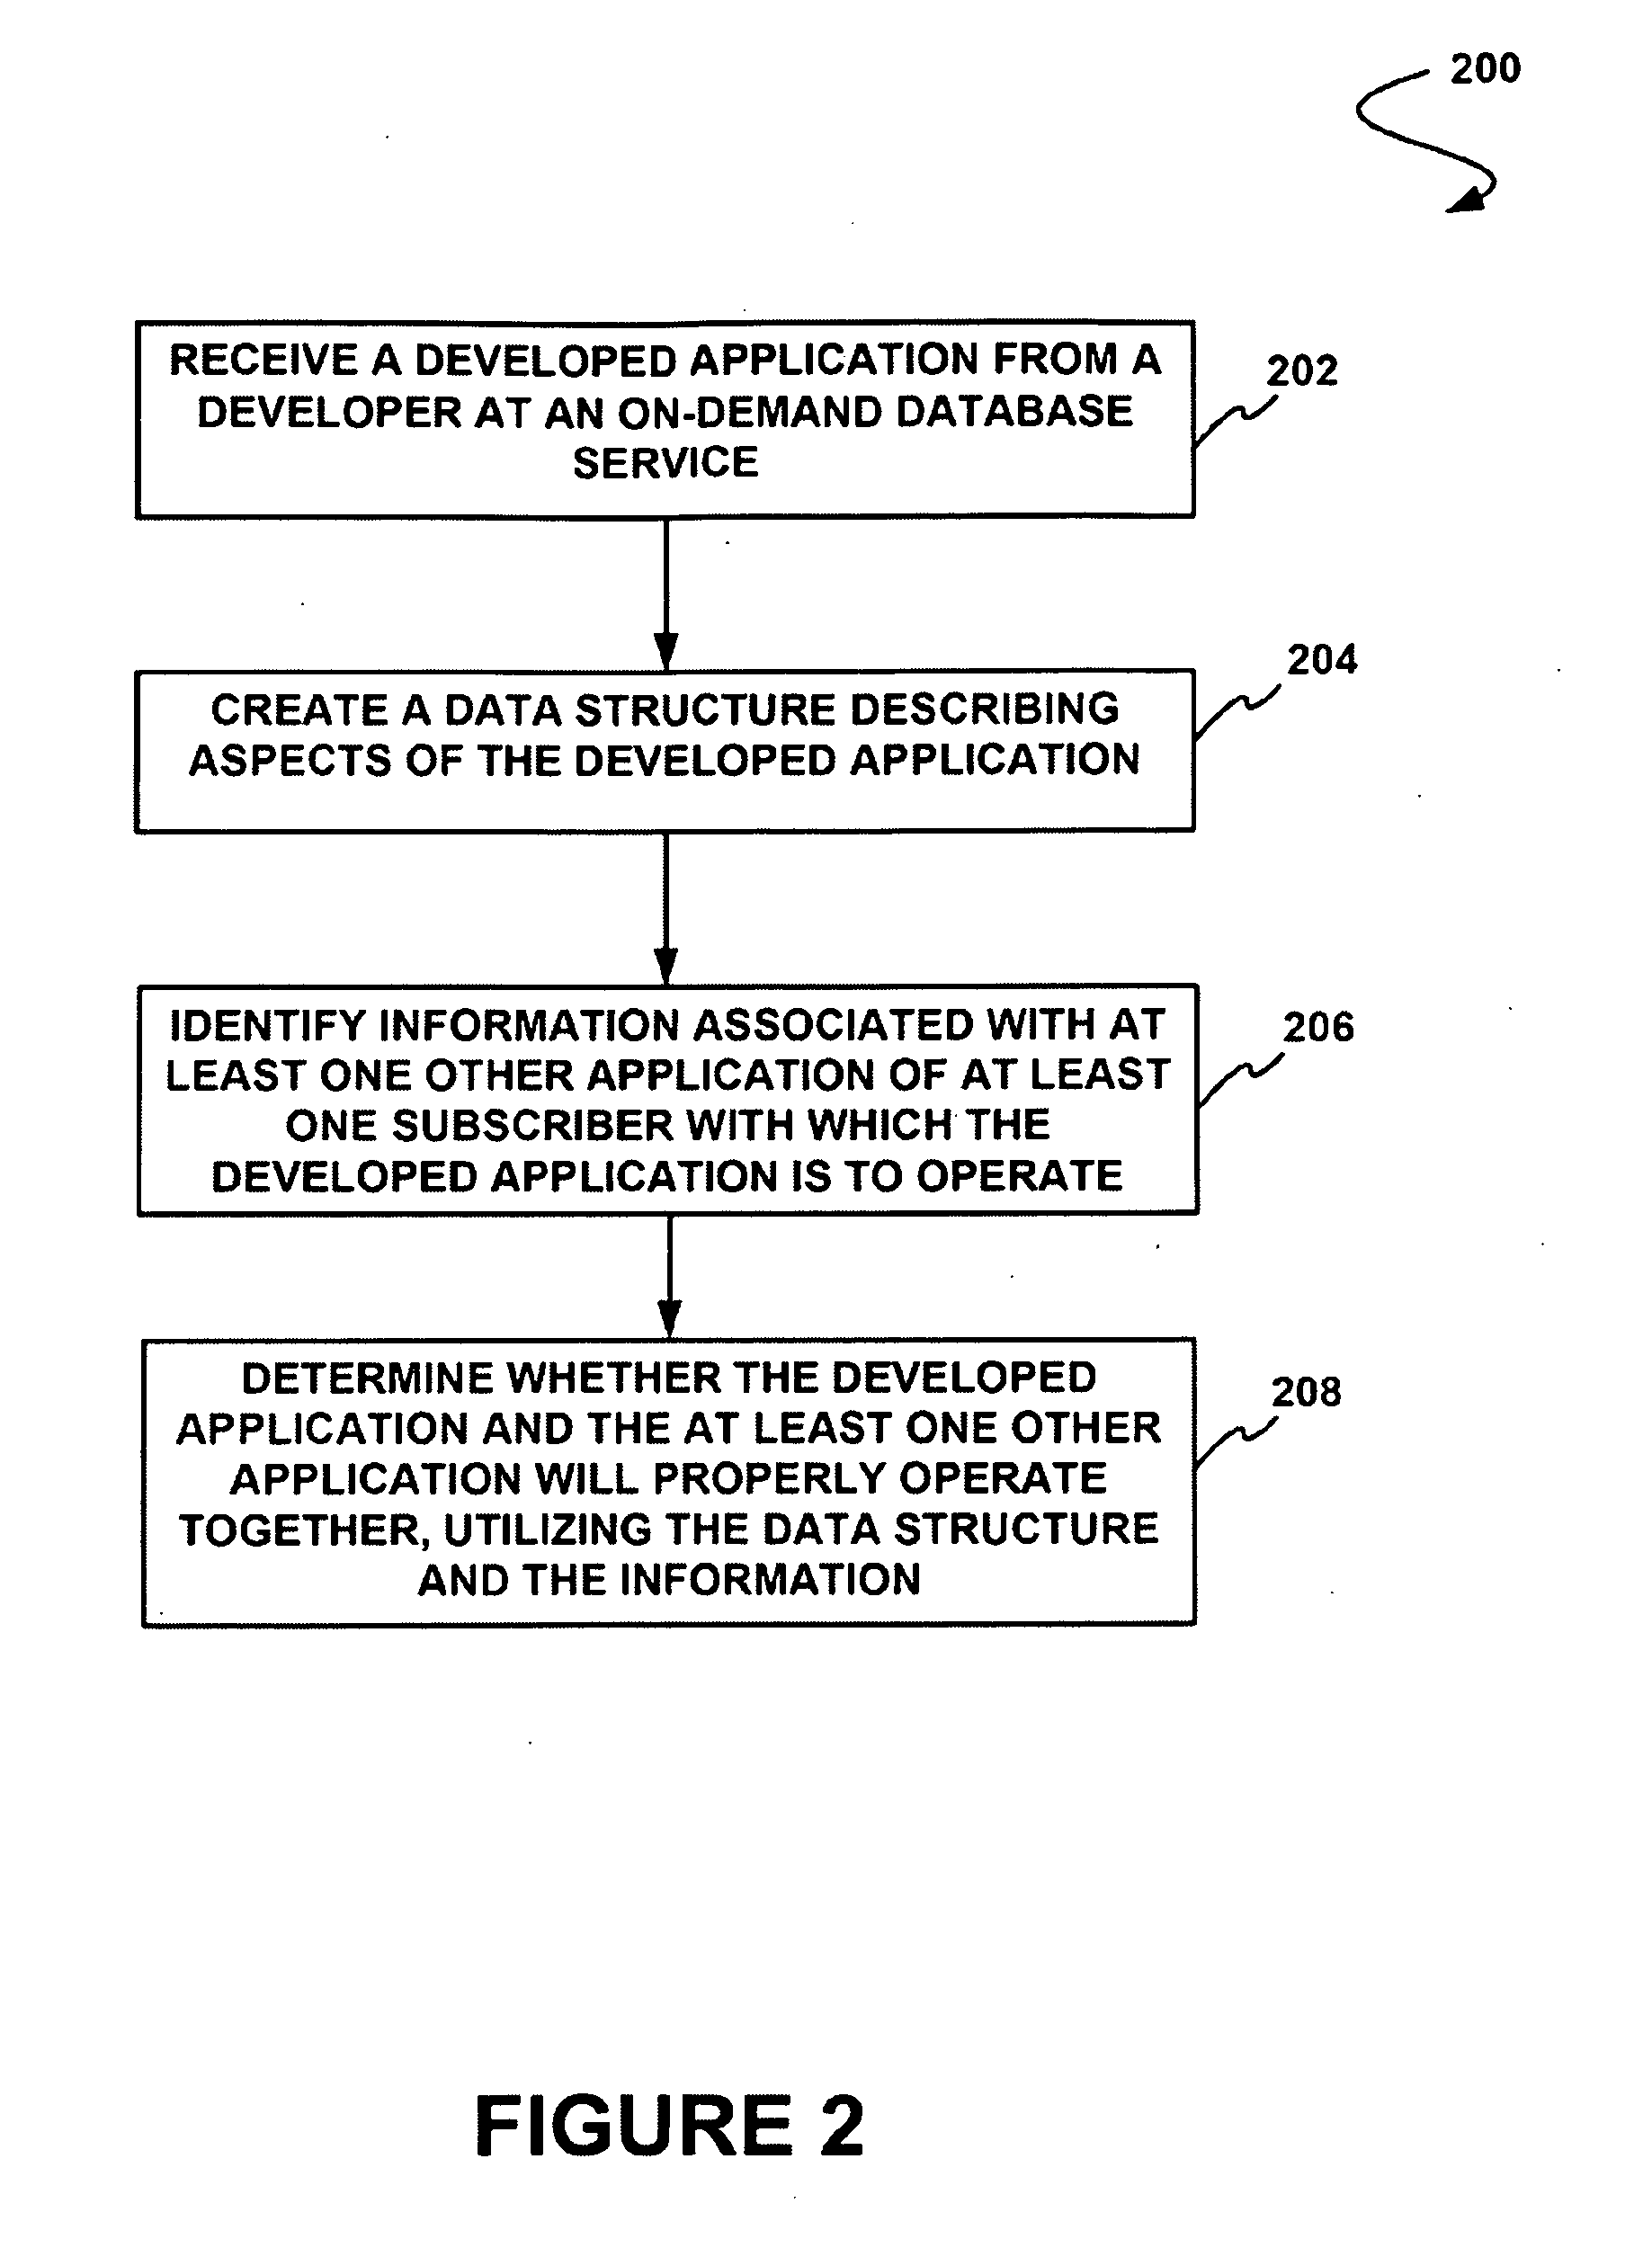 On-demand database service system, method, and computer program product for validating a developed application